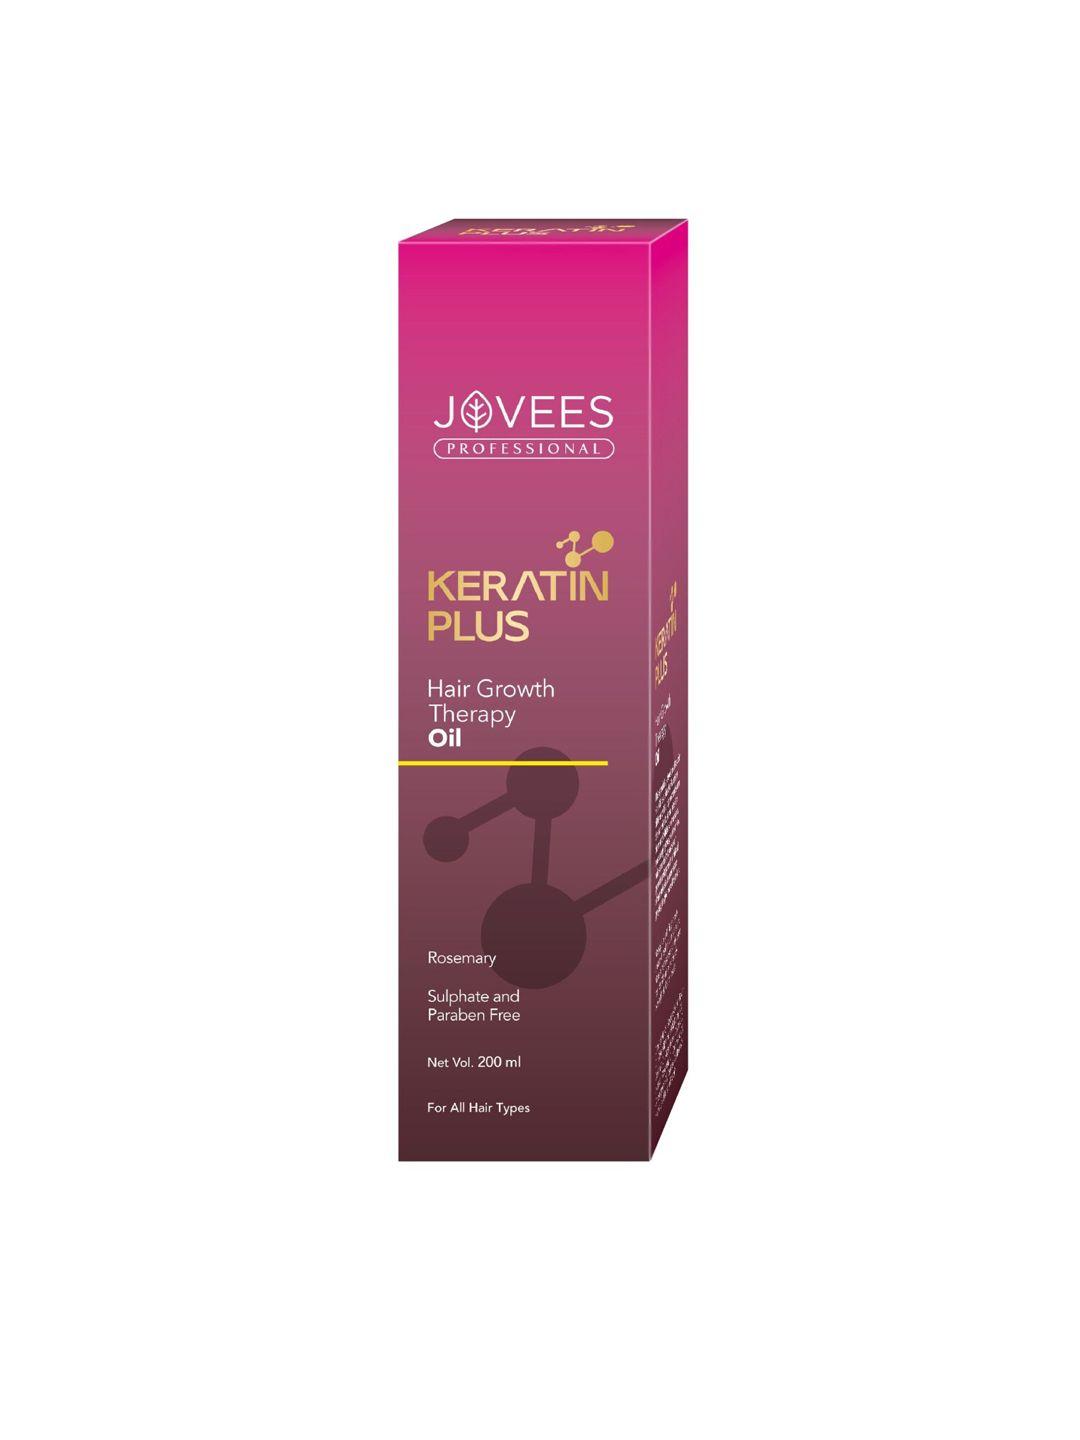 jovees profssional keratin plus hair growth therapy oil with rosemary - 200ml